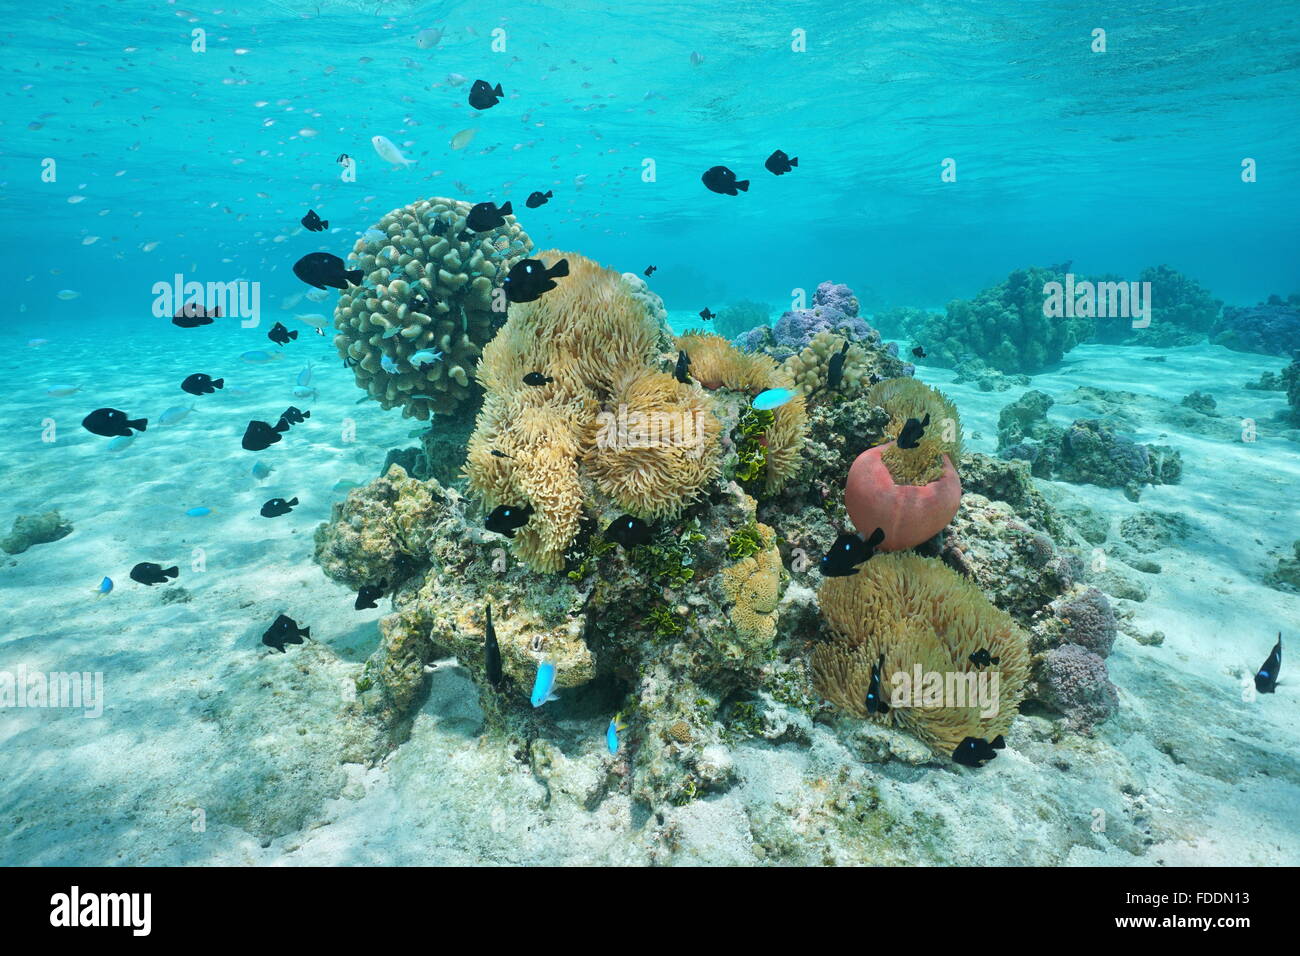 Underwater marine life, fish with sea anemones and corals, lagoon of Huahine, Pacific ocean, French Polynesia Stock Photo